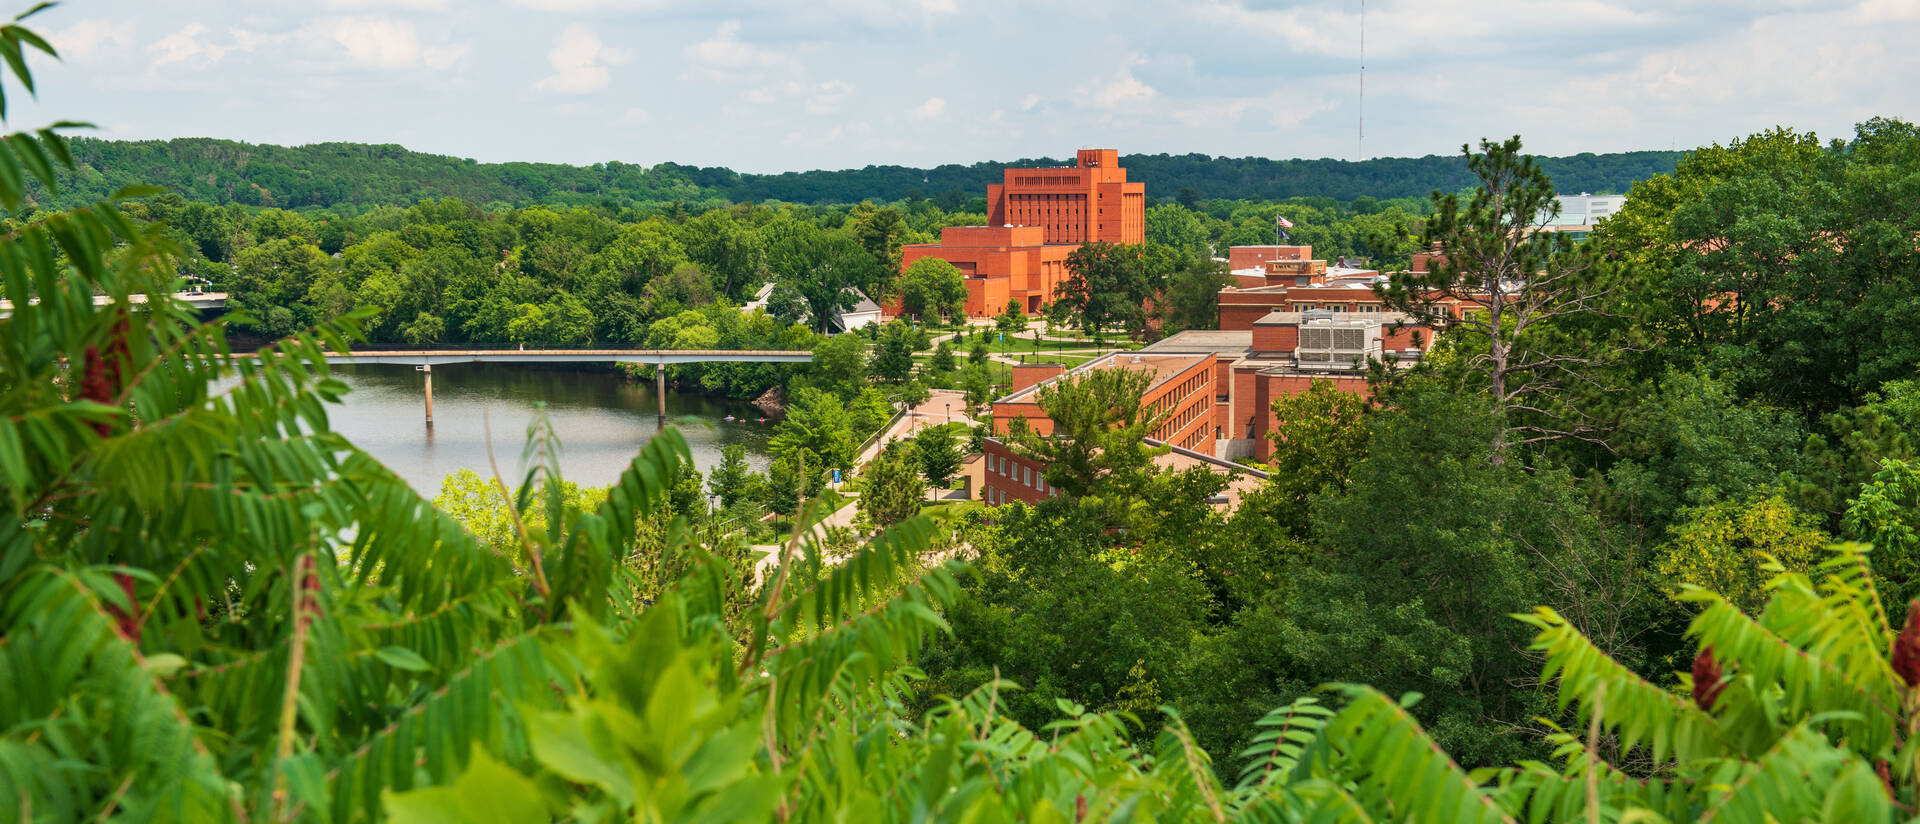 Tops of brick campus buildings surrounded by greenery, seen from a higher vantage point.